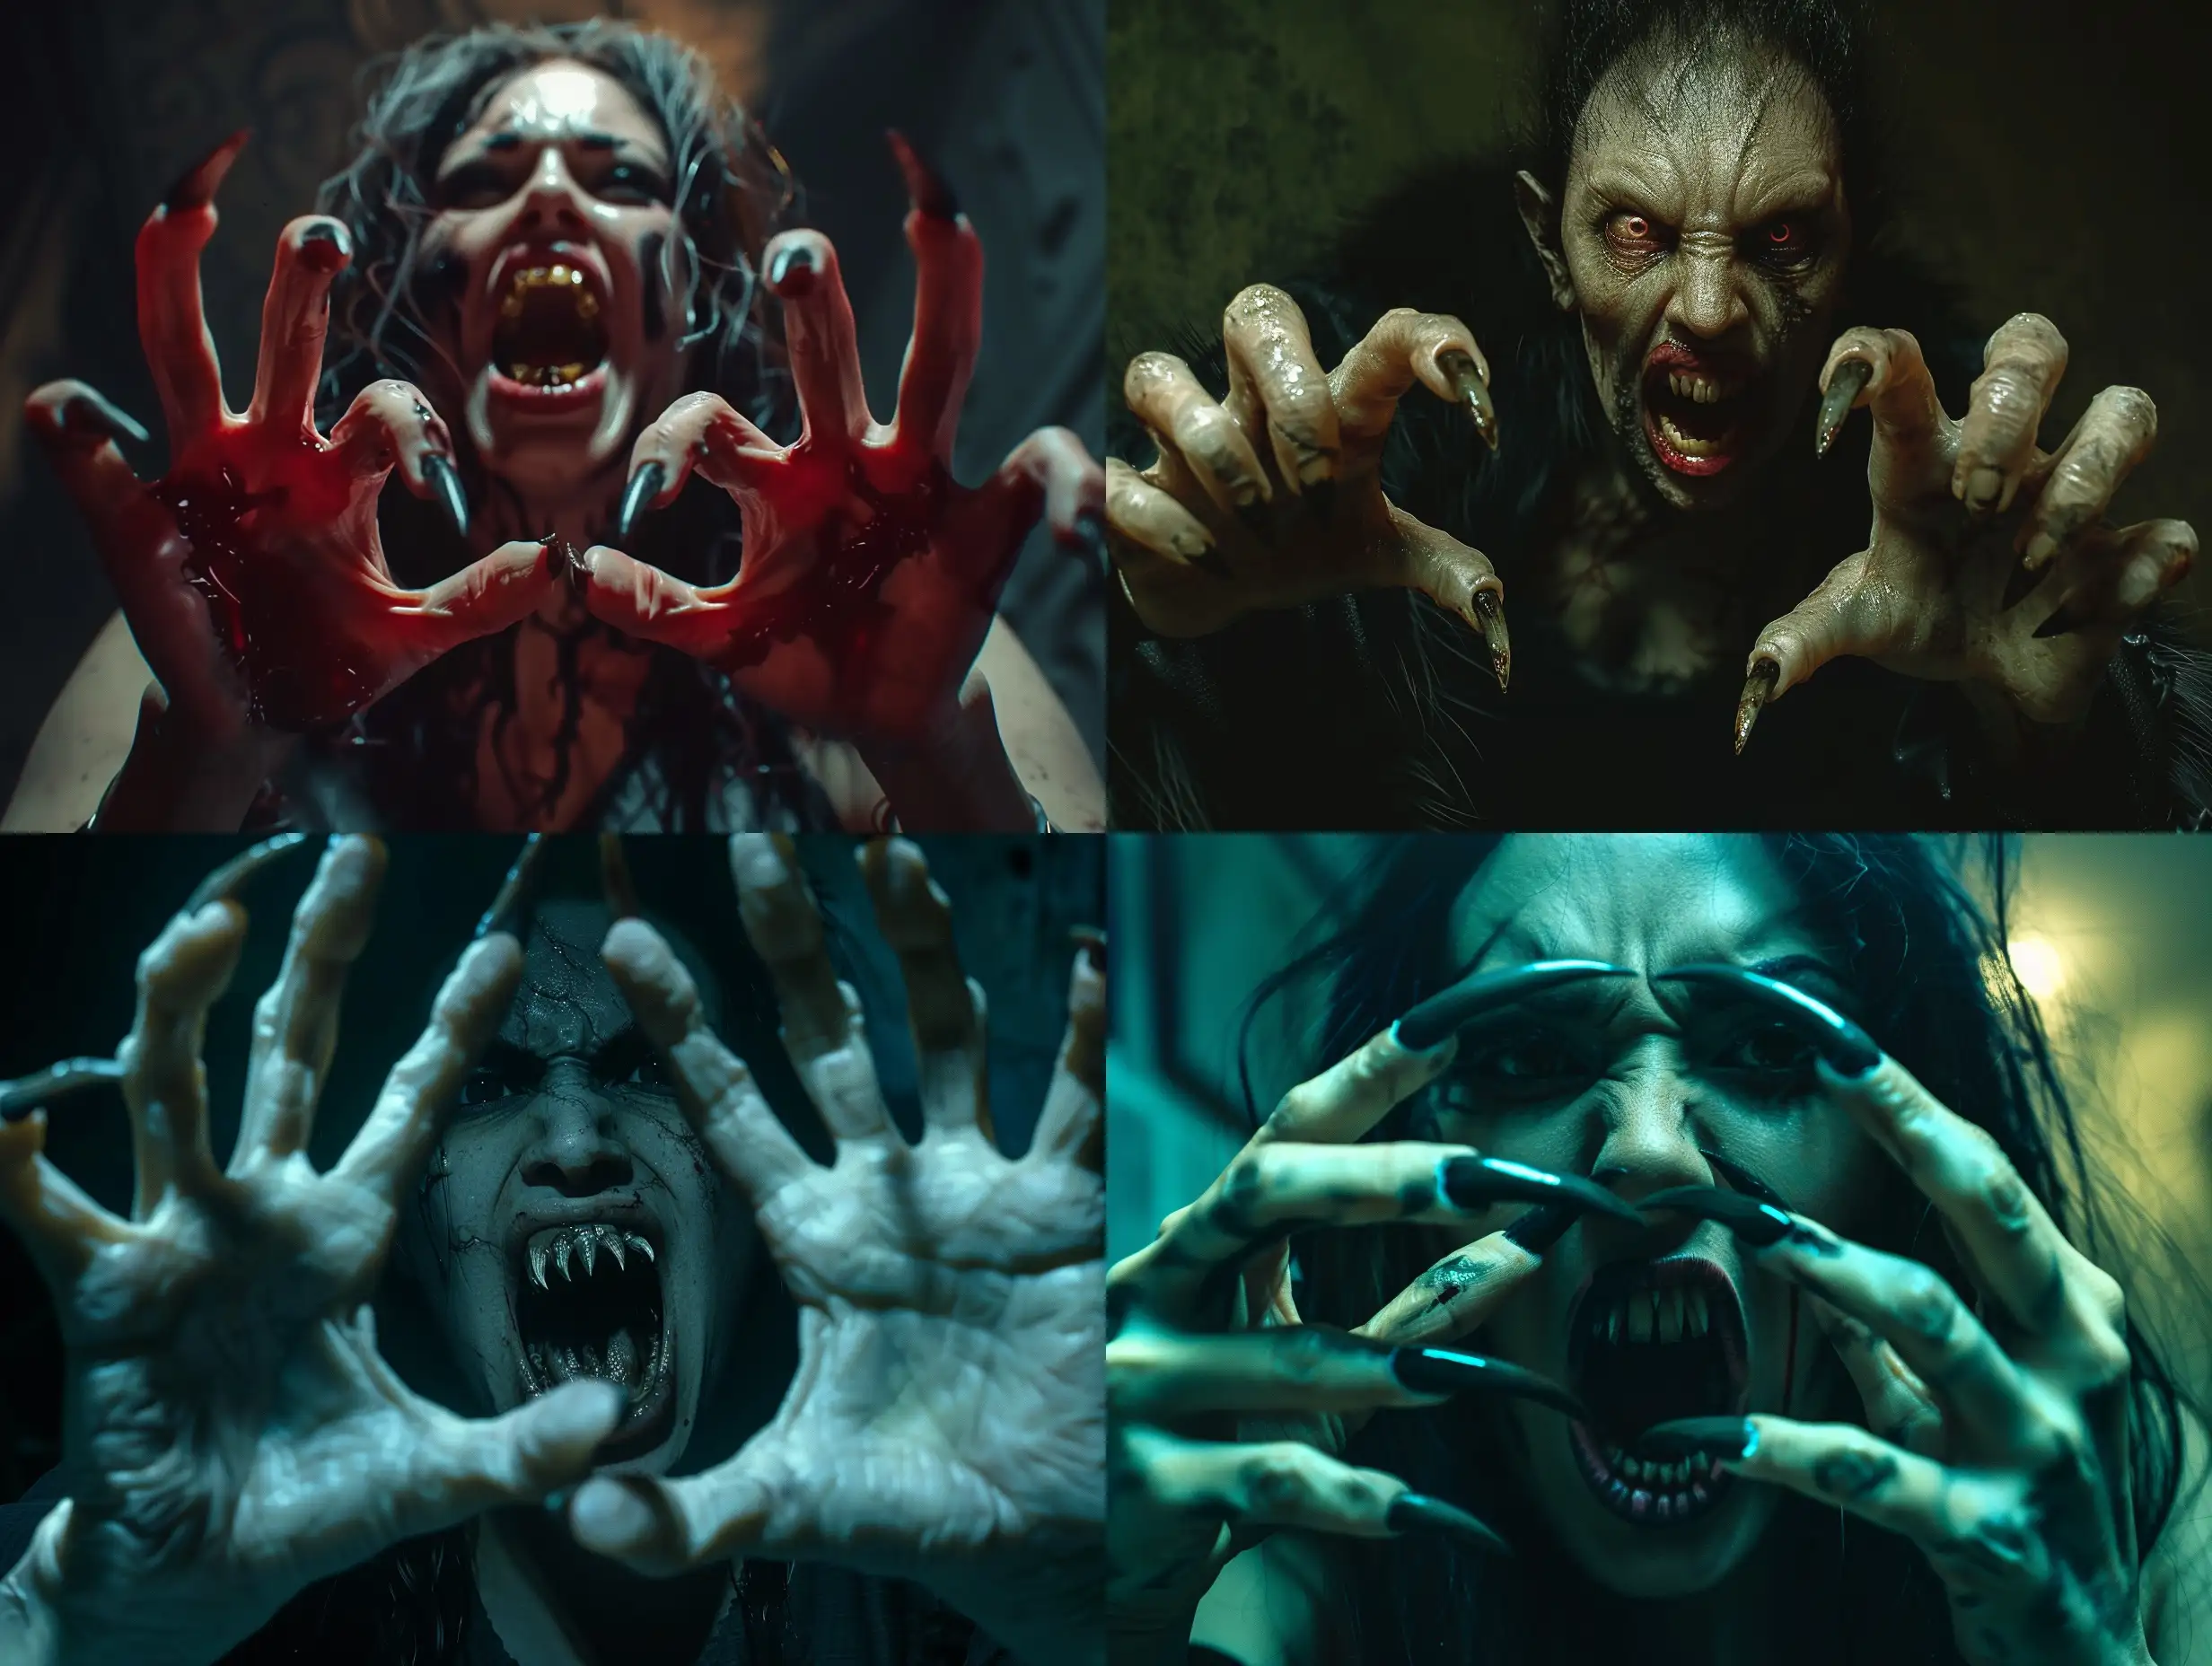 A photorealistic scene of a wild ugly monstruos vampire woman with extra long pointed fingernails, on each hands with five fingers, her mouth is threateningly open, and terrible teeth look like fangs, the vampire looks like she climbed out of the grave, her nails resemble the claws of a predators.scene inside darkness room,hyper-realism, cinematic, high detail, photo detailing, high quality, photorealistic, aggressive, dark atmosphere, realistic, the smallest details, detailed nails, horror, atmospheric lighting, full anatomical, photorealism, detailed, textured, dark, haunting, night-time scene, intense, creepy, undead, spooky, eerie, atmospheric lighting, nightmare, grotesque, terrifying, realistic anatomy, human hands, very clear without flaws with five fingers.